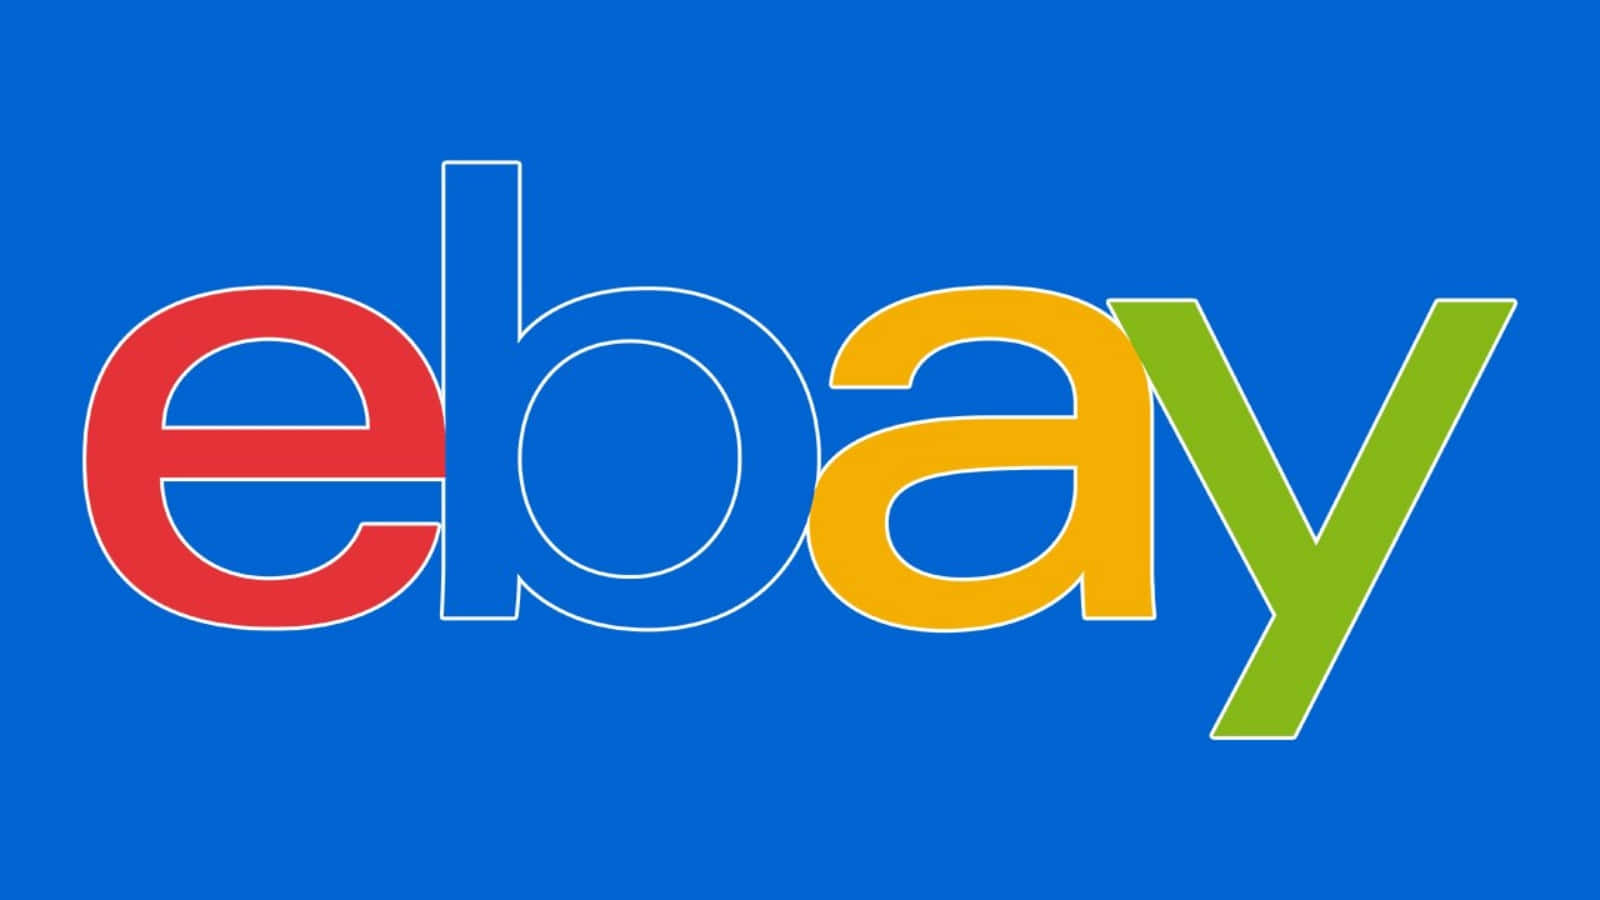 Download Save Money With eBay's Outstanding Deals | Wallpapers.com